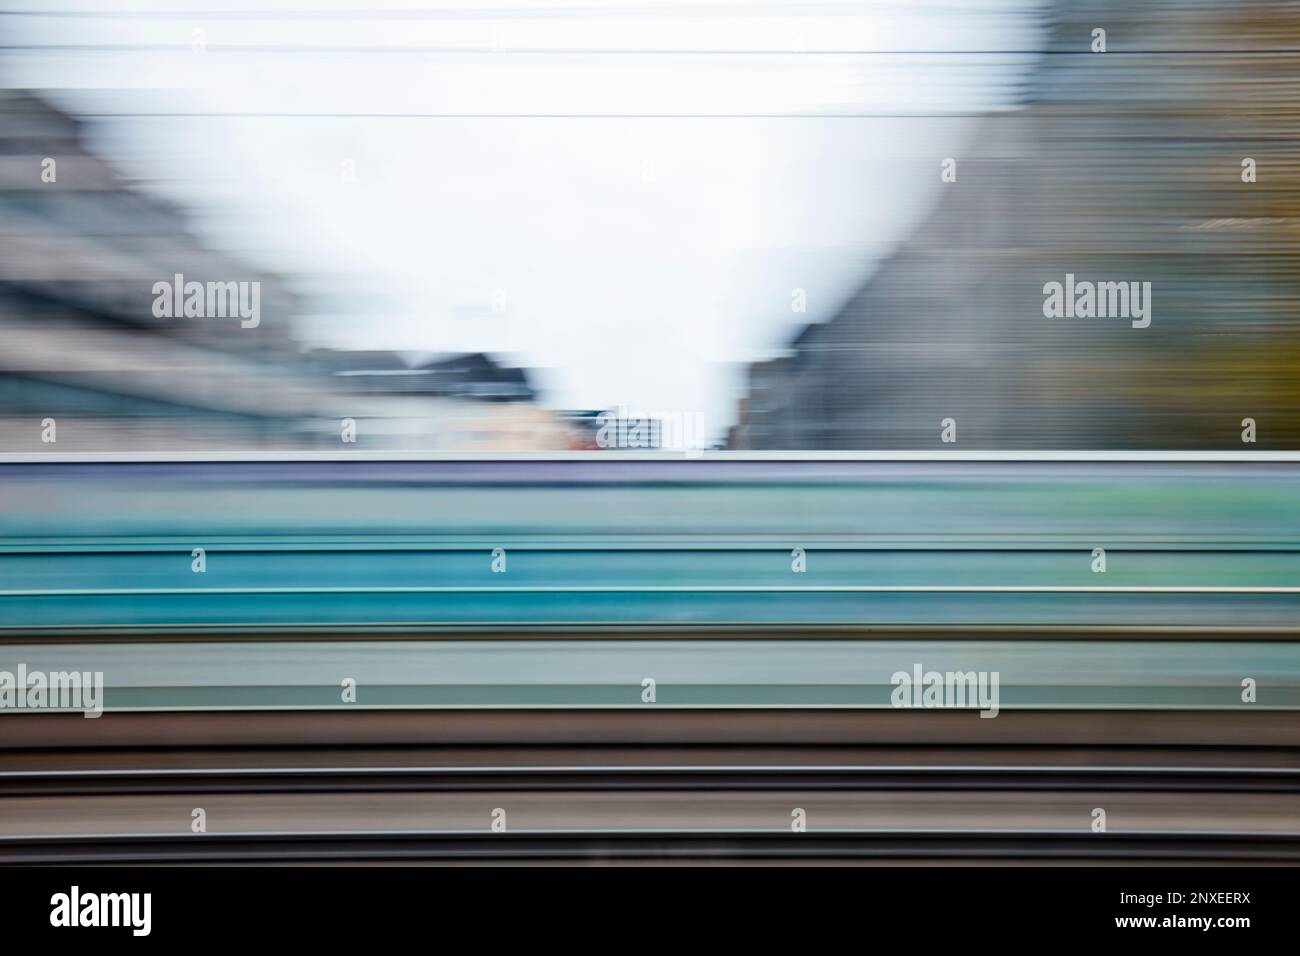 Passing by scenery motion blur Stock Photo